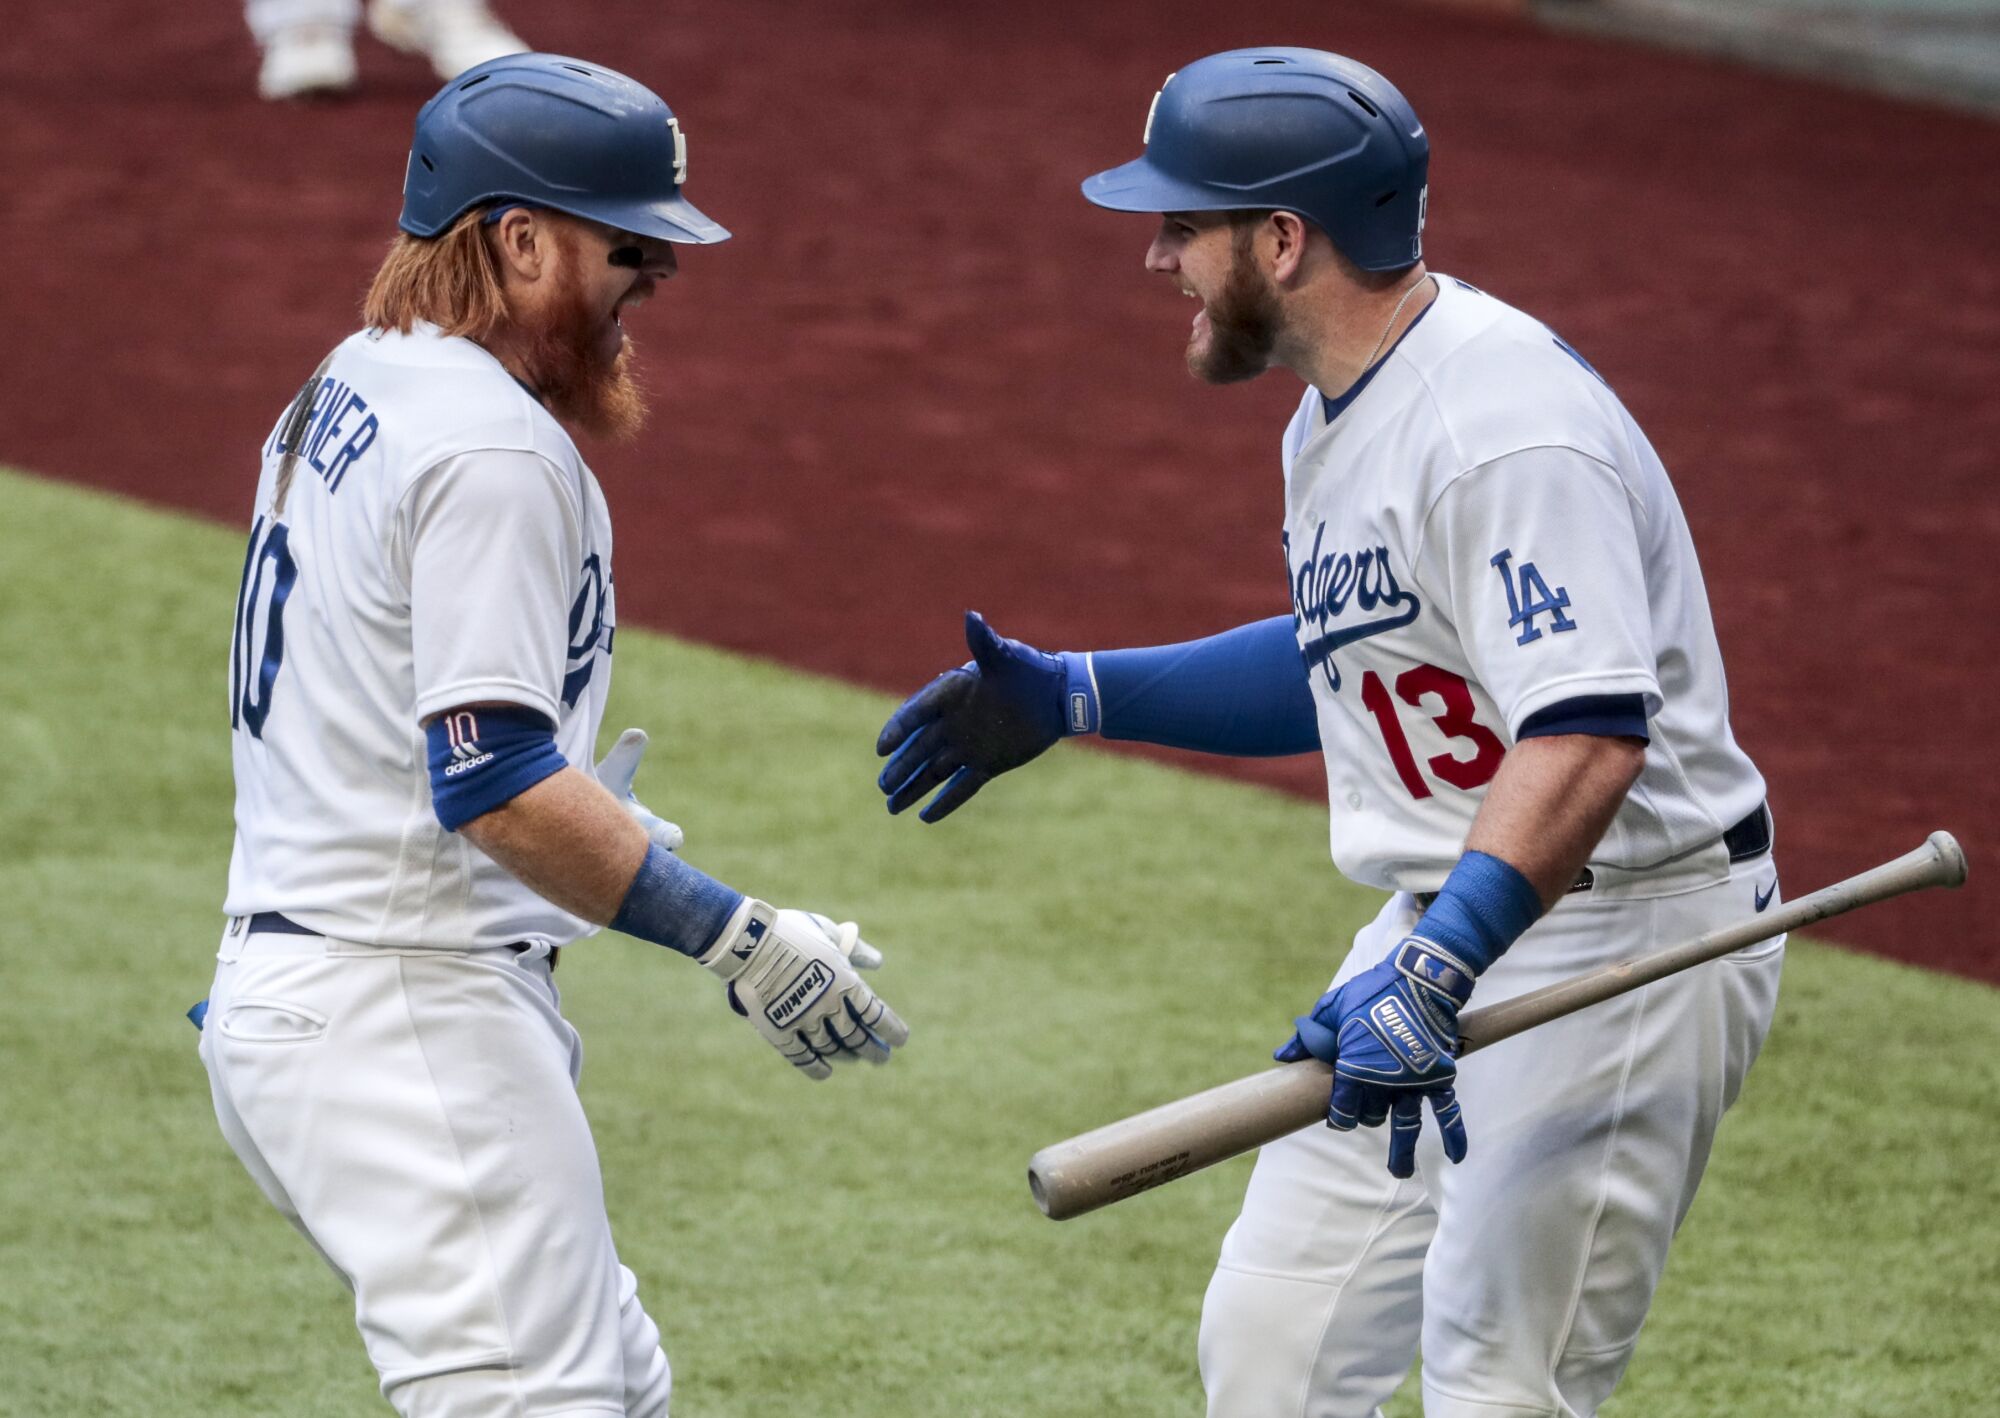 Dodgers third baseman Justin Turner celebrates with first baseman Max Muncy after hitting a home run in the first inning.